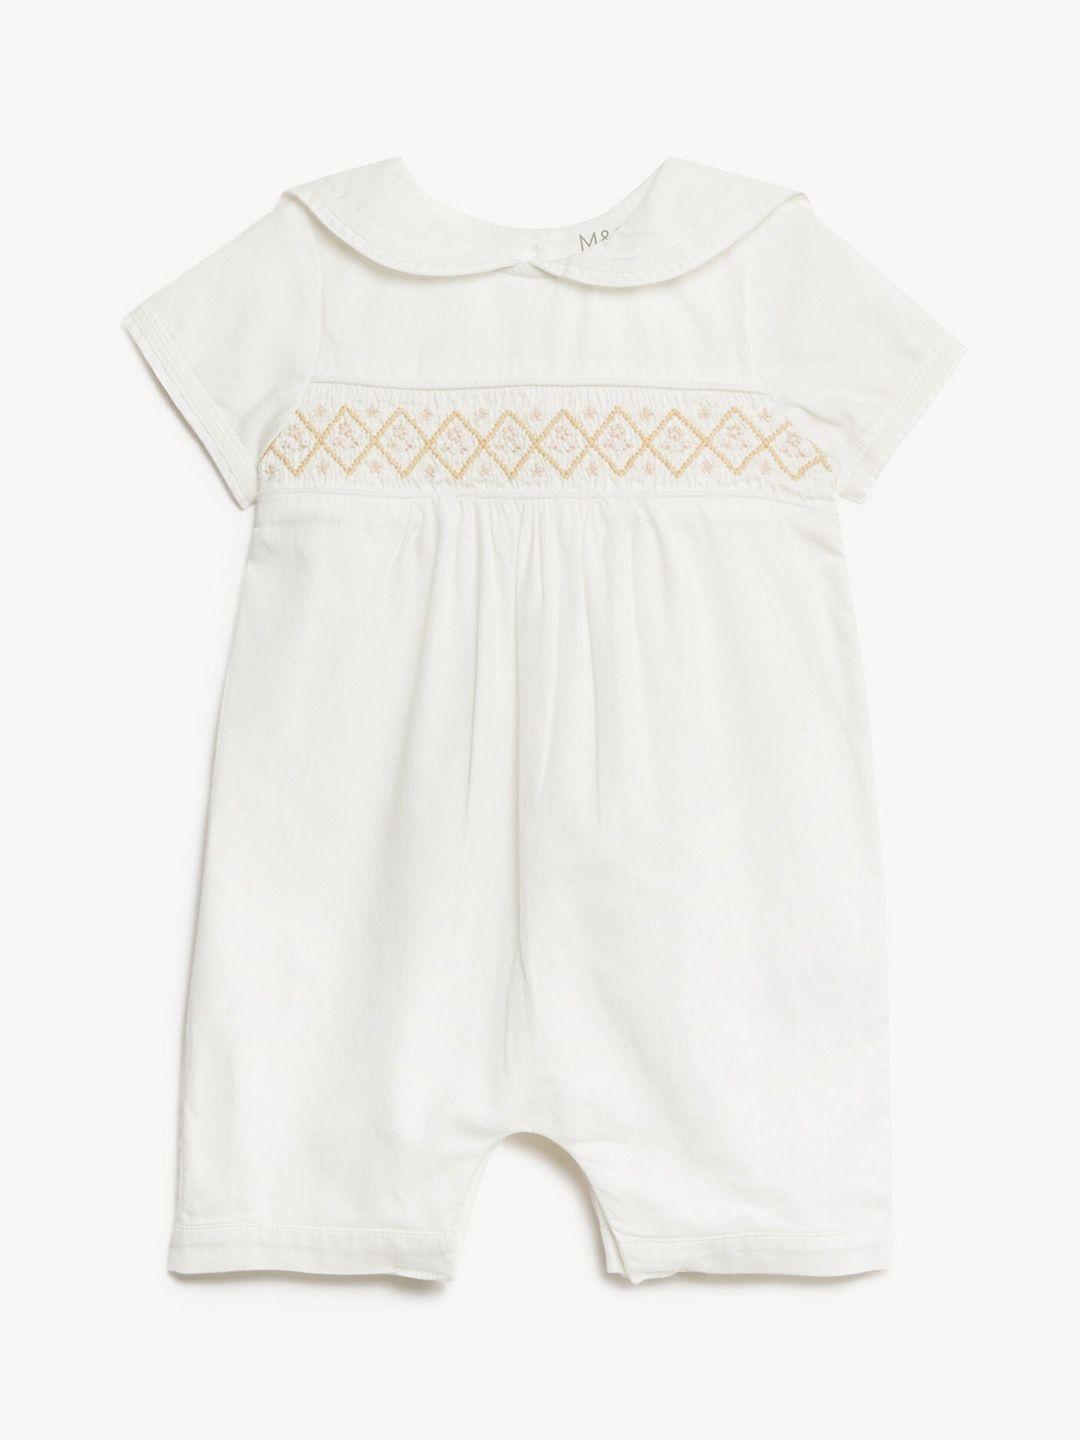 marks & spencer infant embroidered cotton rompers